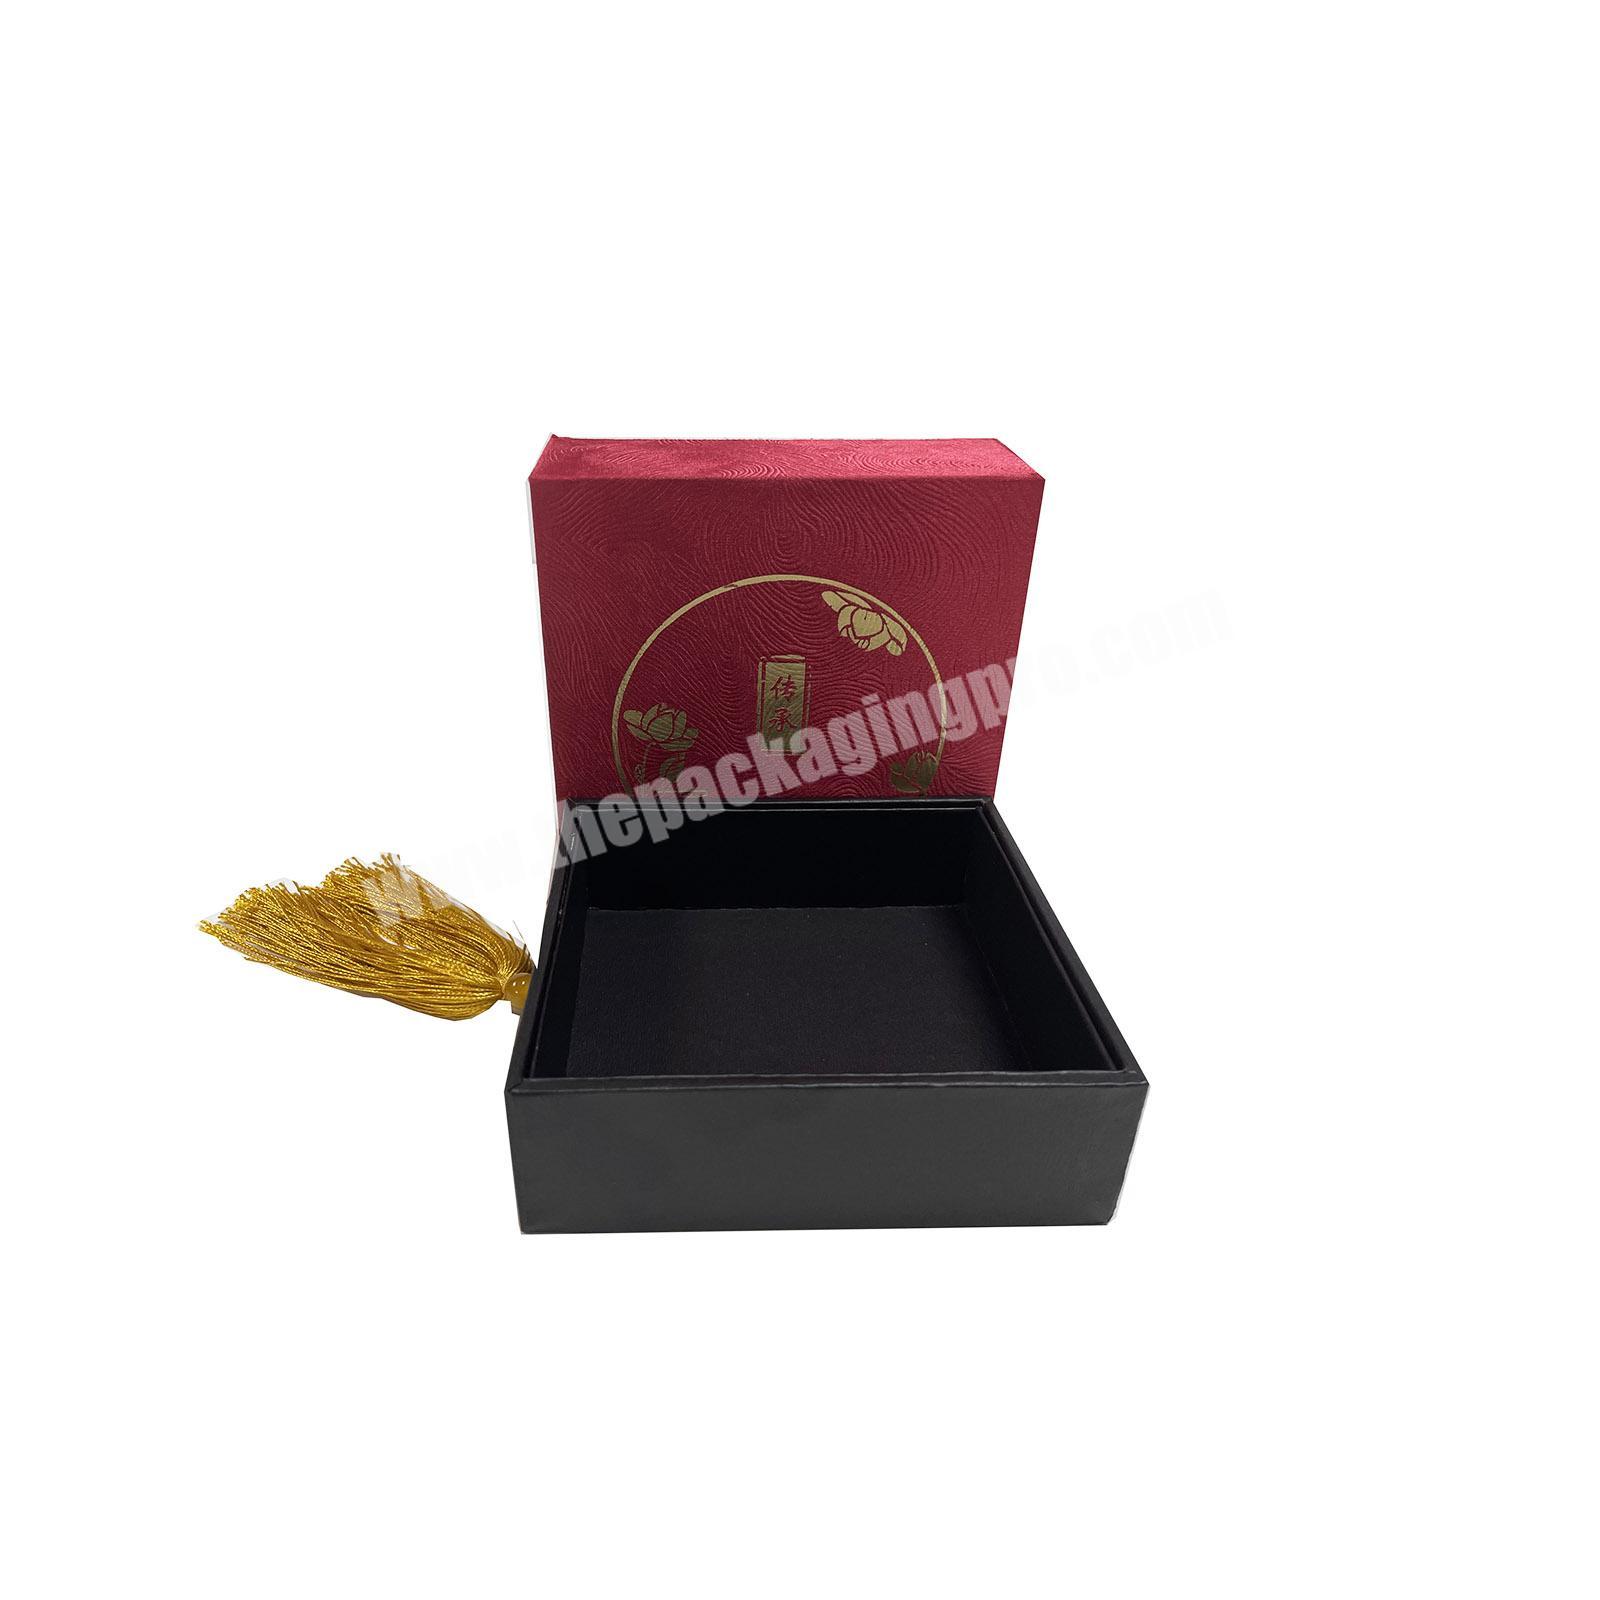 Custom Luxury Giftcard Business Playing Candle Luxury Packaging Box For Birthday Gift